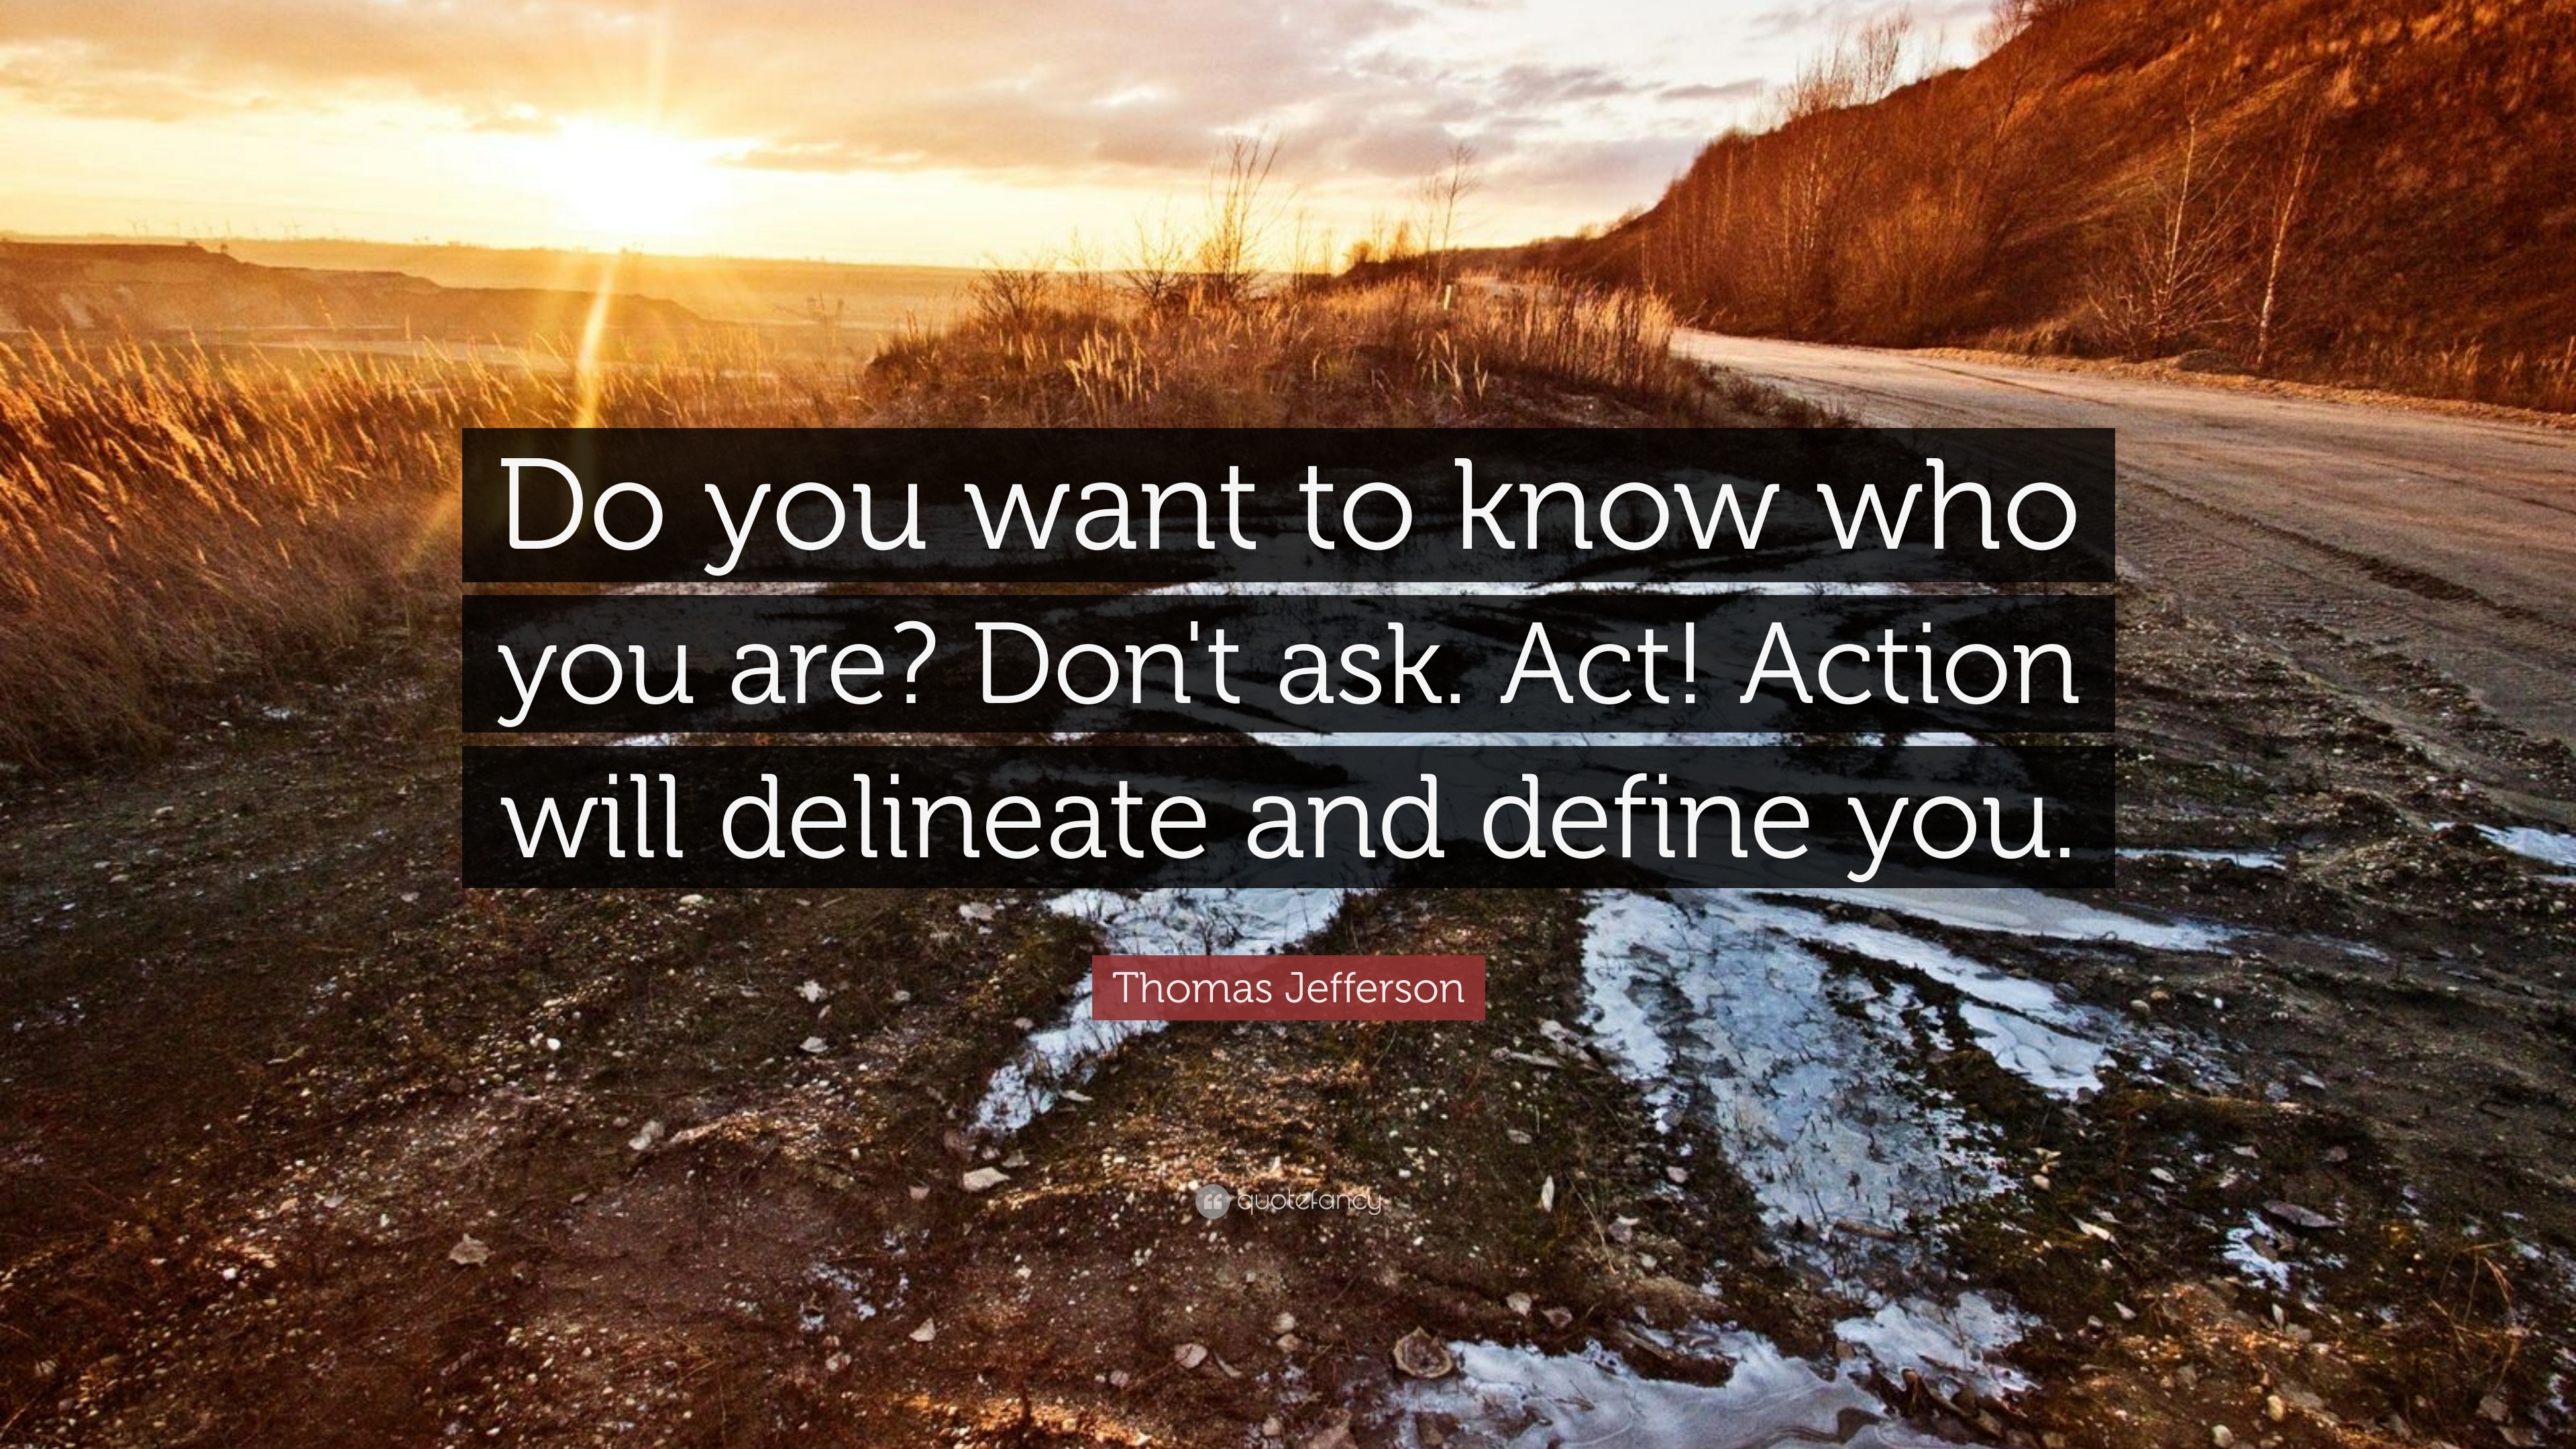 3840x2160 Thomas Jefferson Quote: “Do you want to know who you are? Don'